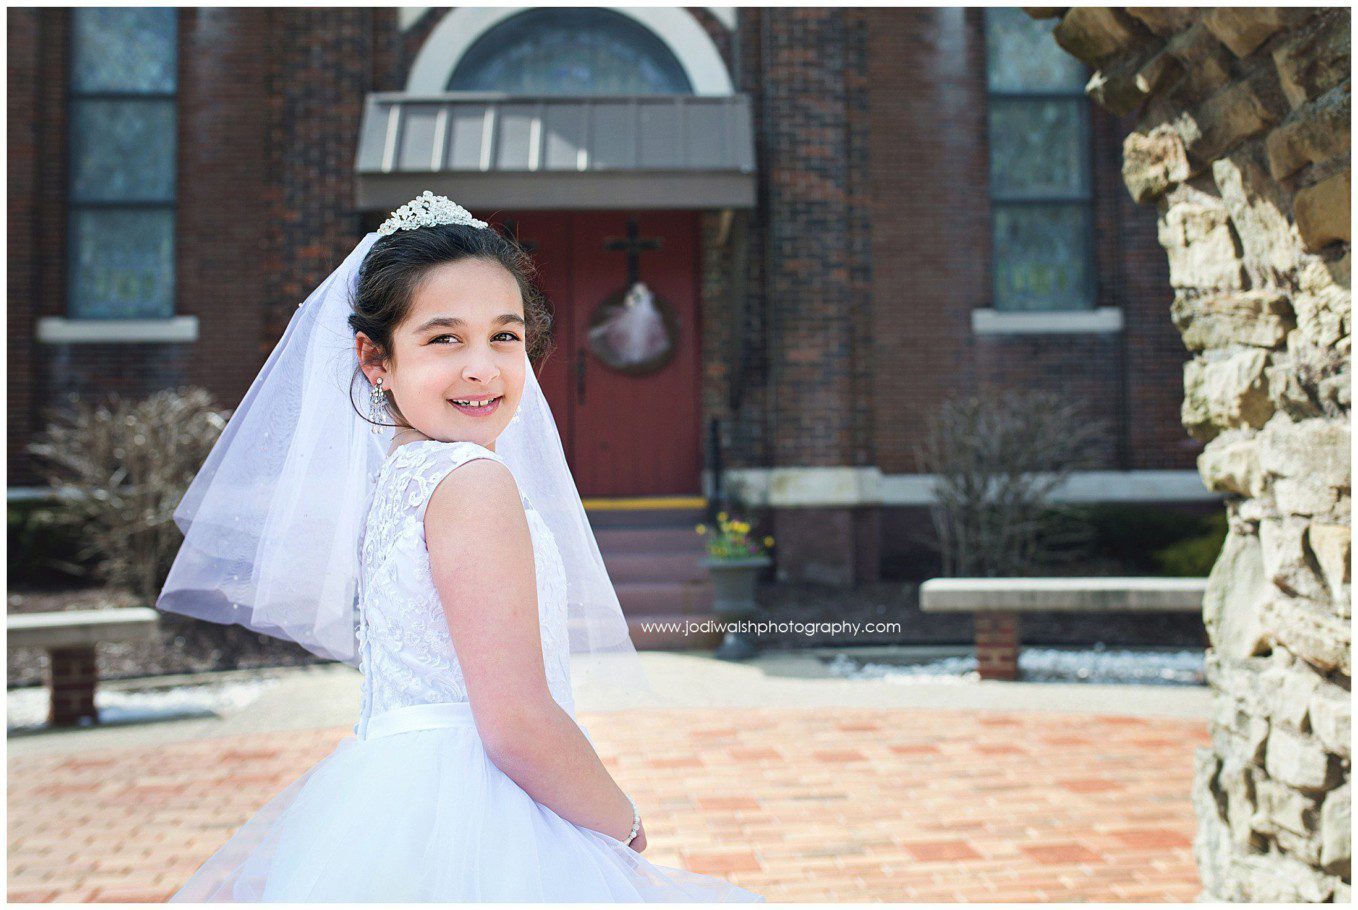 image of a little girl wearing white dress and veil for first holy communion at St Alphonsus Church, Wexford